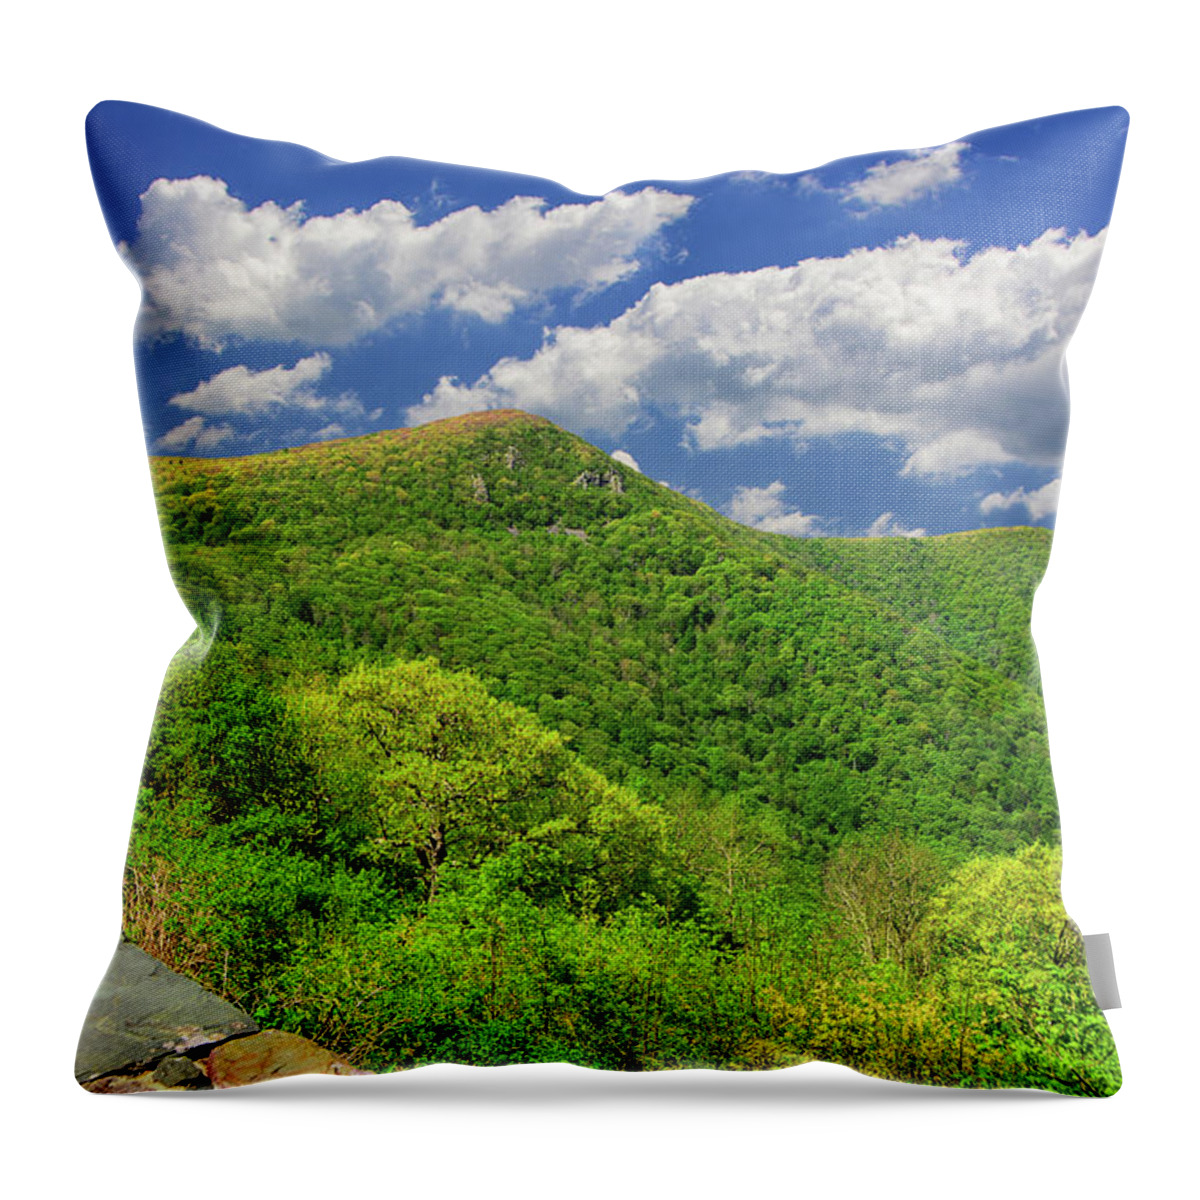 Mount Hawksbill From Crescent Rock Overlock With Thermal Clouds Throw Pillow featuring the photograph Mount Hawksbill from Crescent Rock Overlock With Thermal Clouds by Raymond Salani III